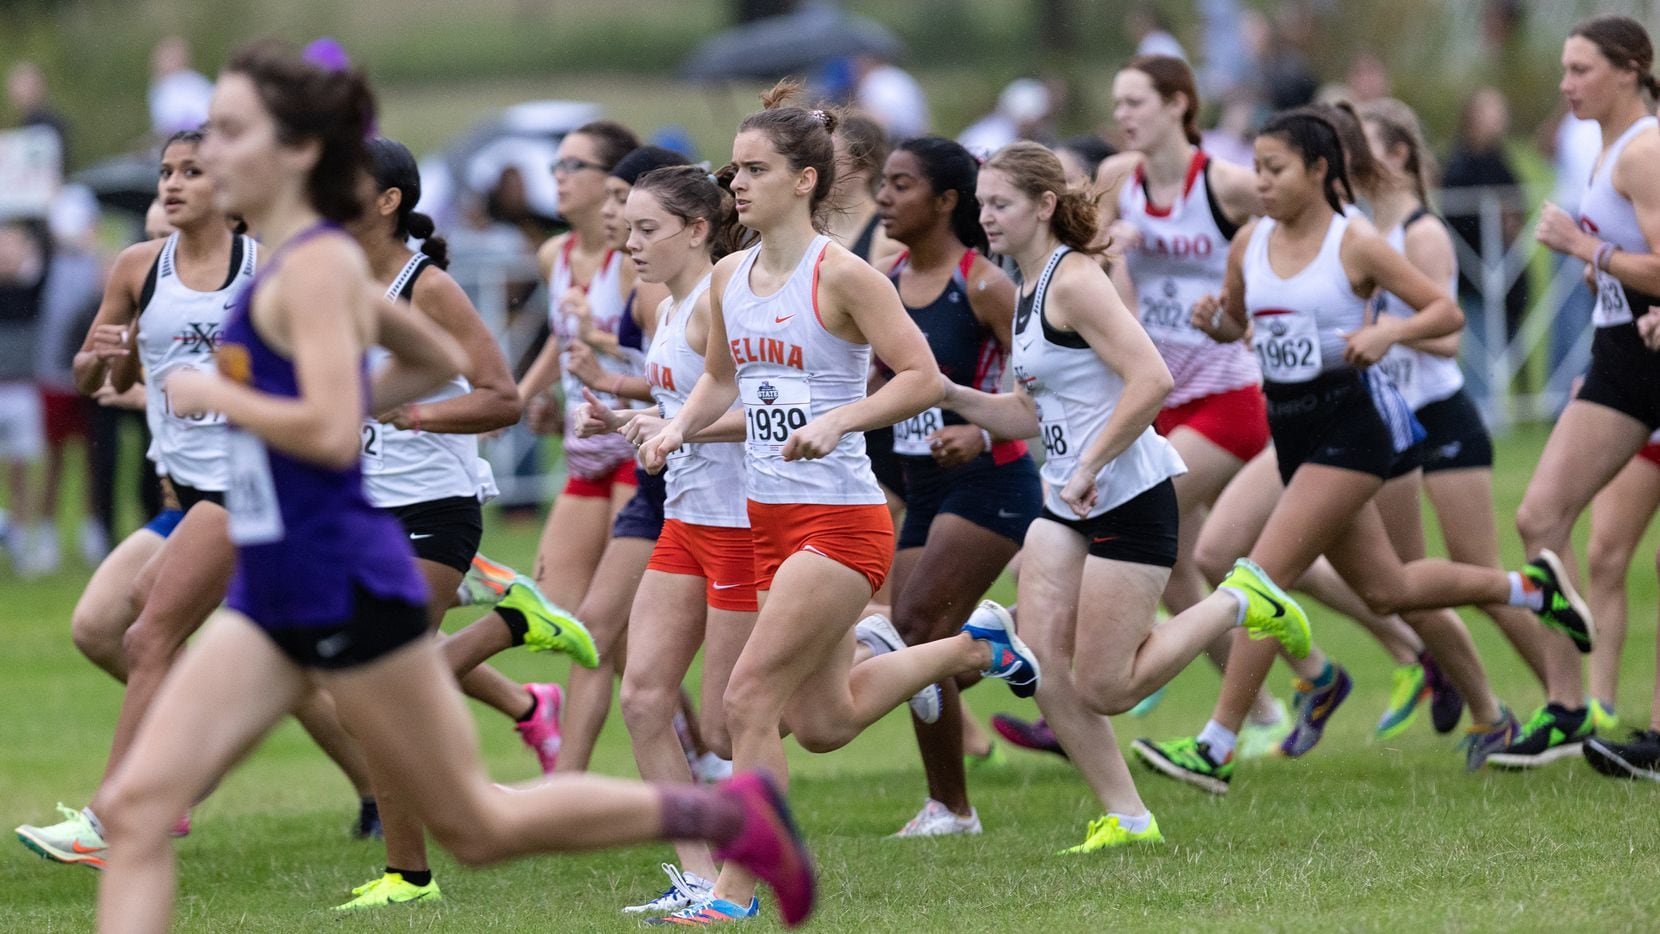 2022 UIL state cross country results for Dallasarea individuals, teams